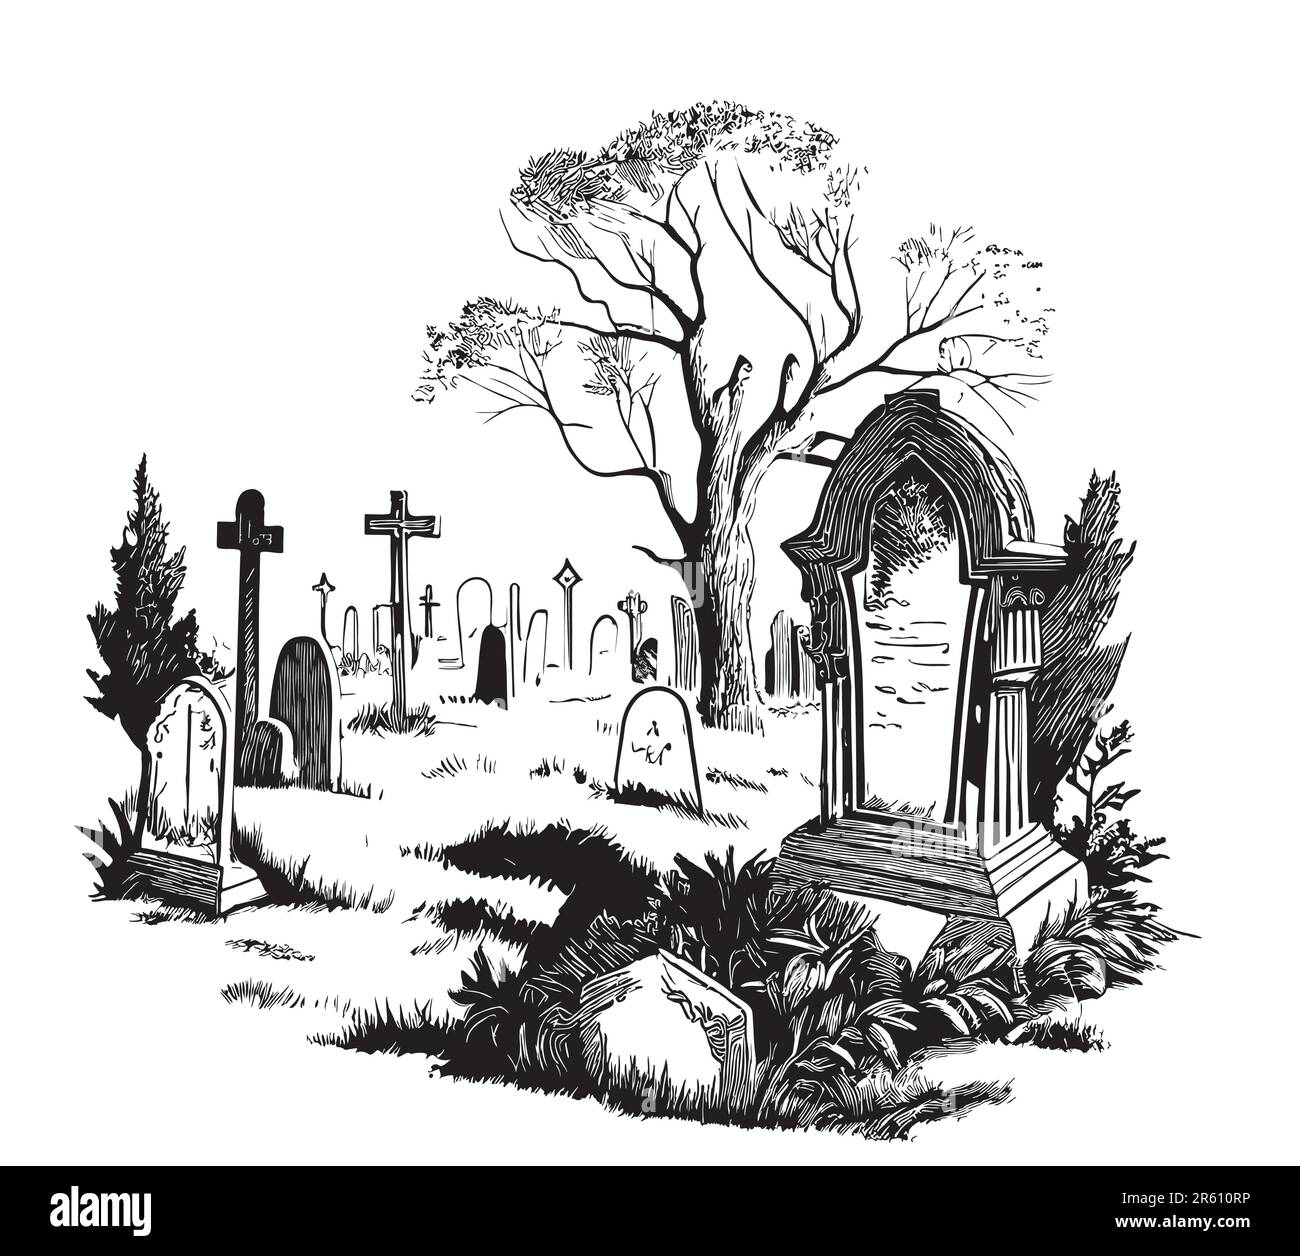 Old retro cemetery hand drawn sketch illustration Stock Vector Image